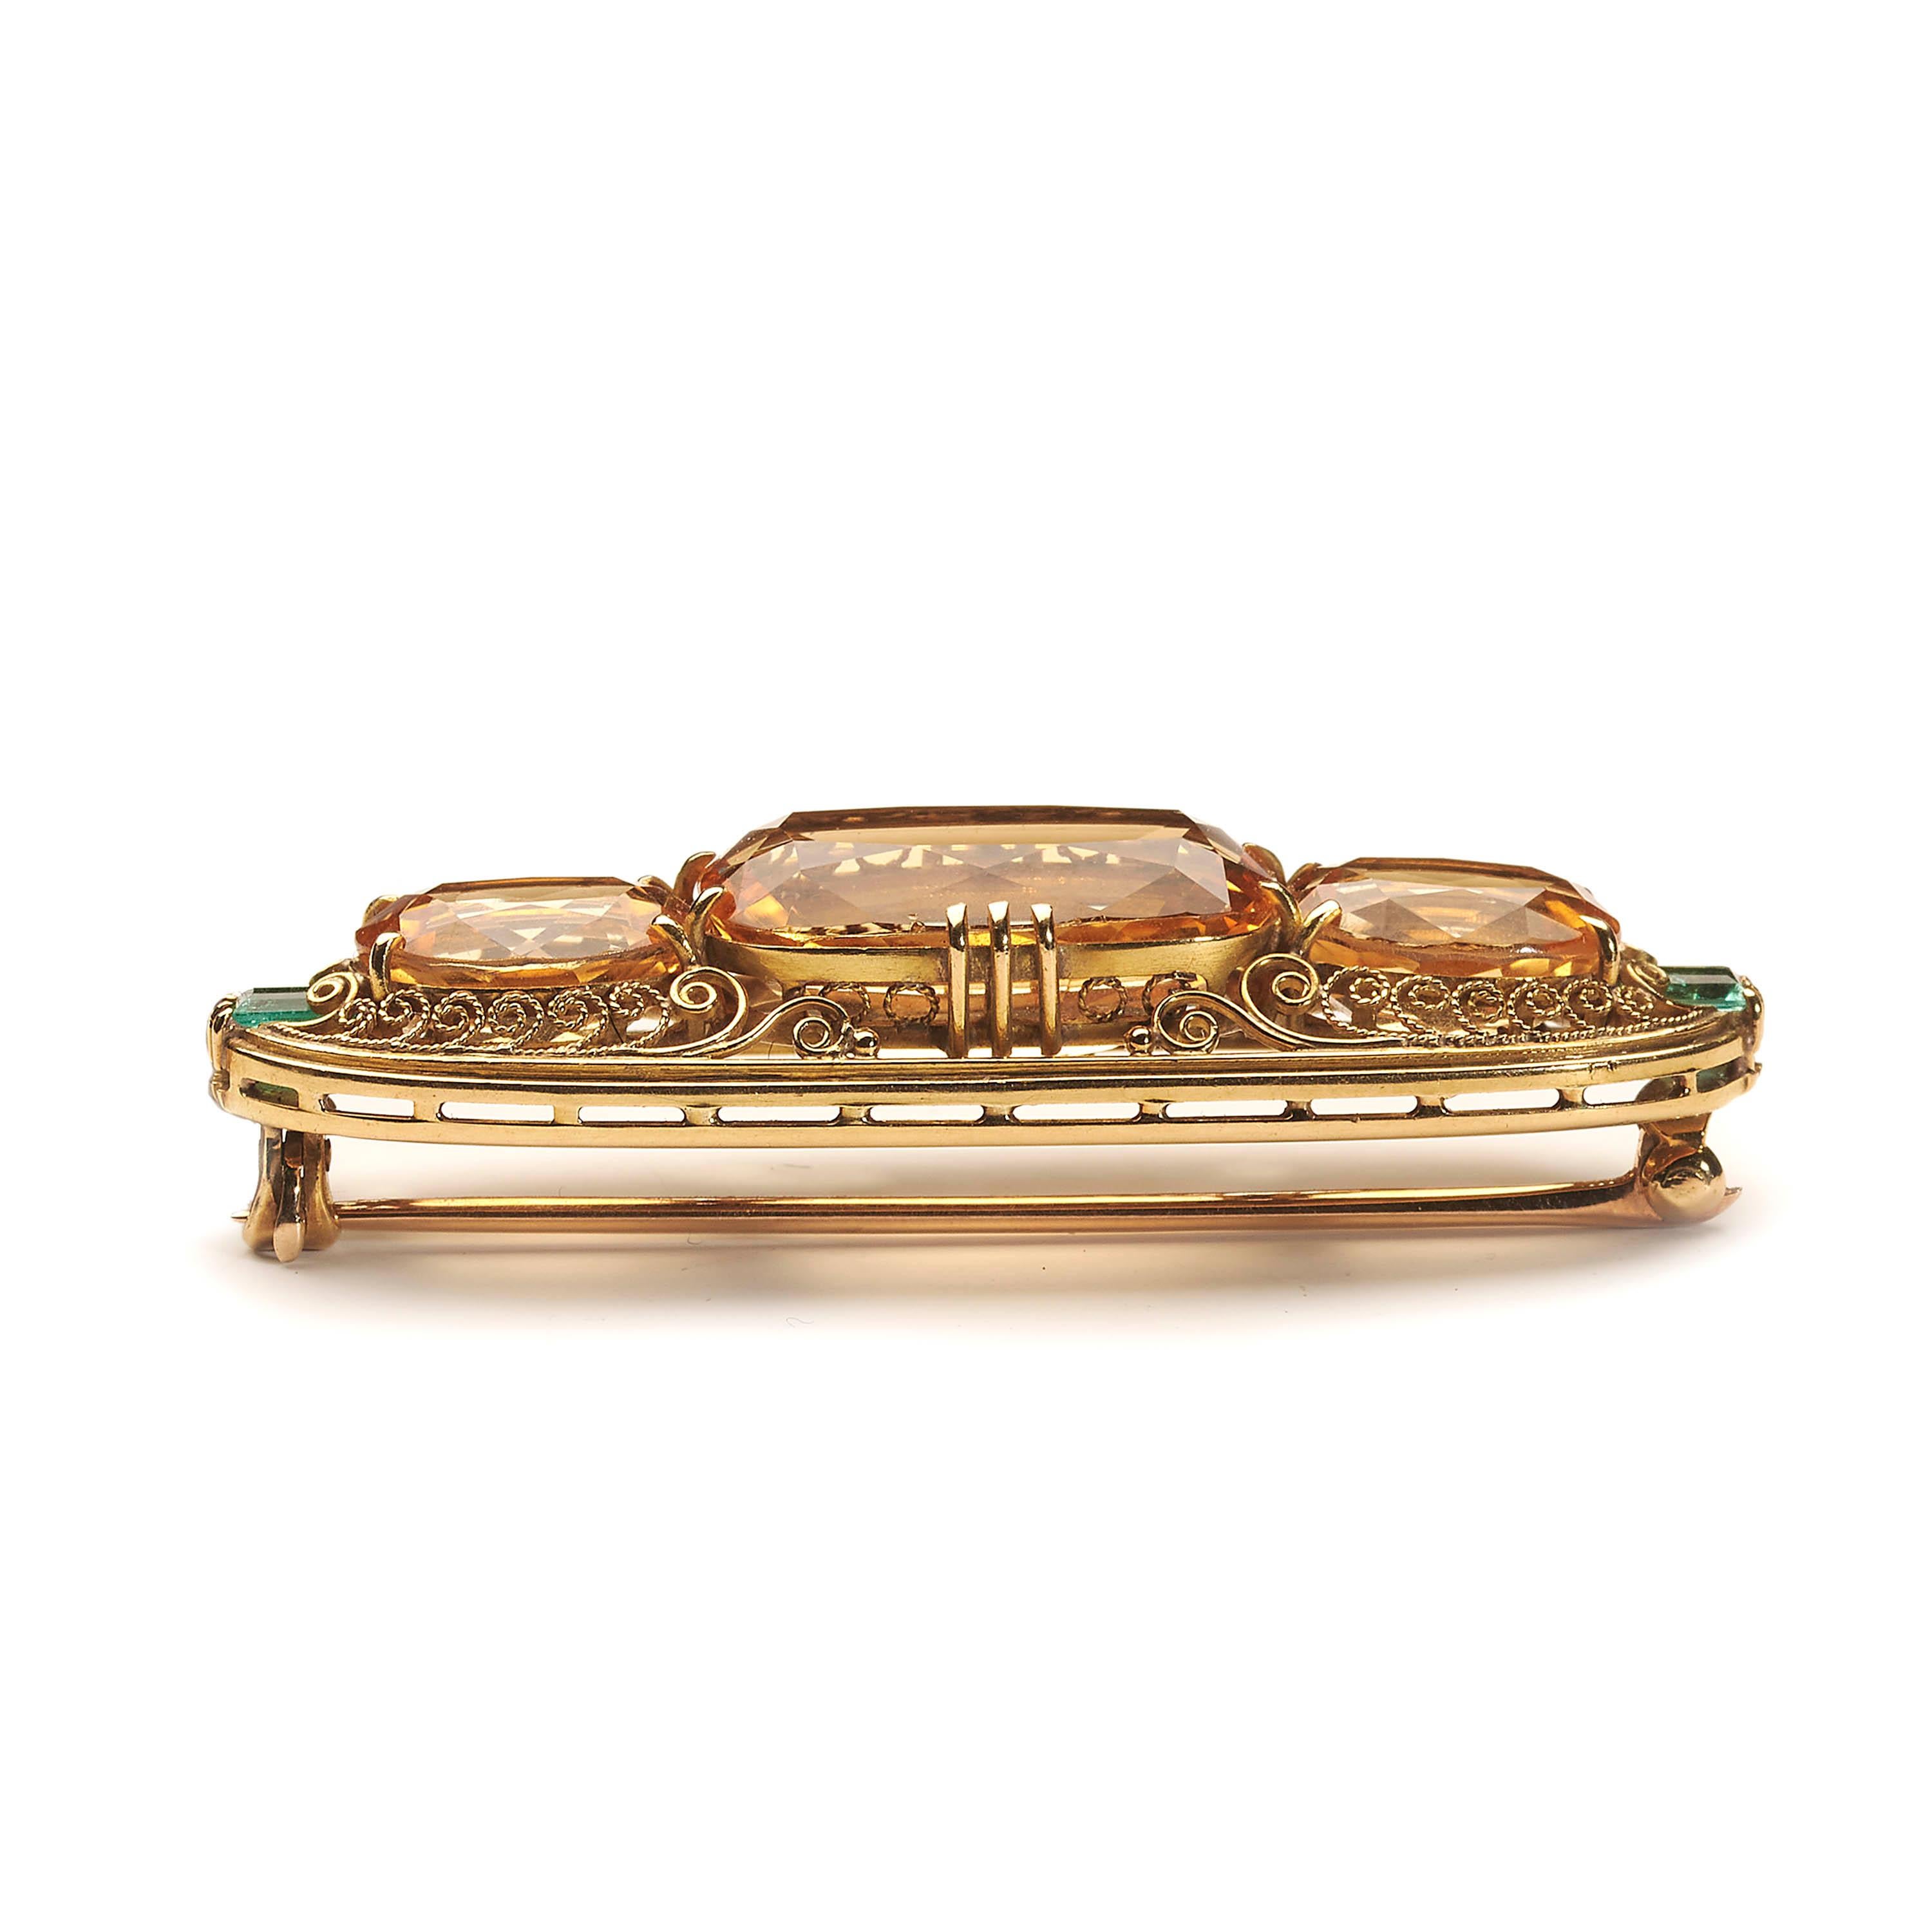 An antique, Belle Époque style, Tiffany & Co. imperial topaz and emerald brooch, set with a trio of faceted, cushion-cut and faceted, oval-cut imperial topaz, with an estimated total weight of approximately 26.5 carats, accented by a step cut